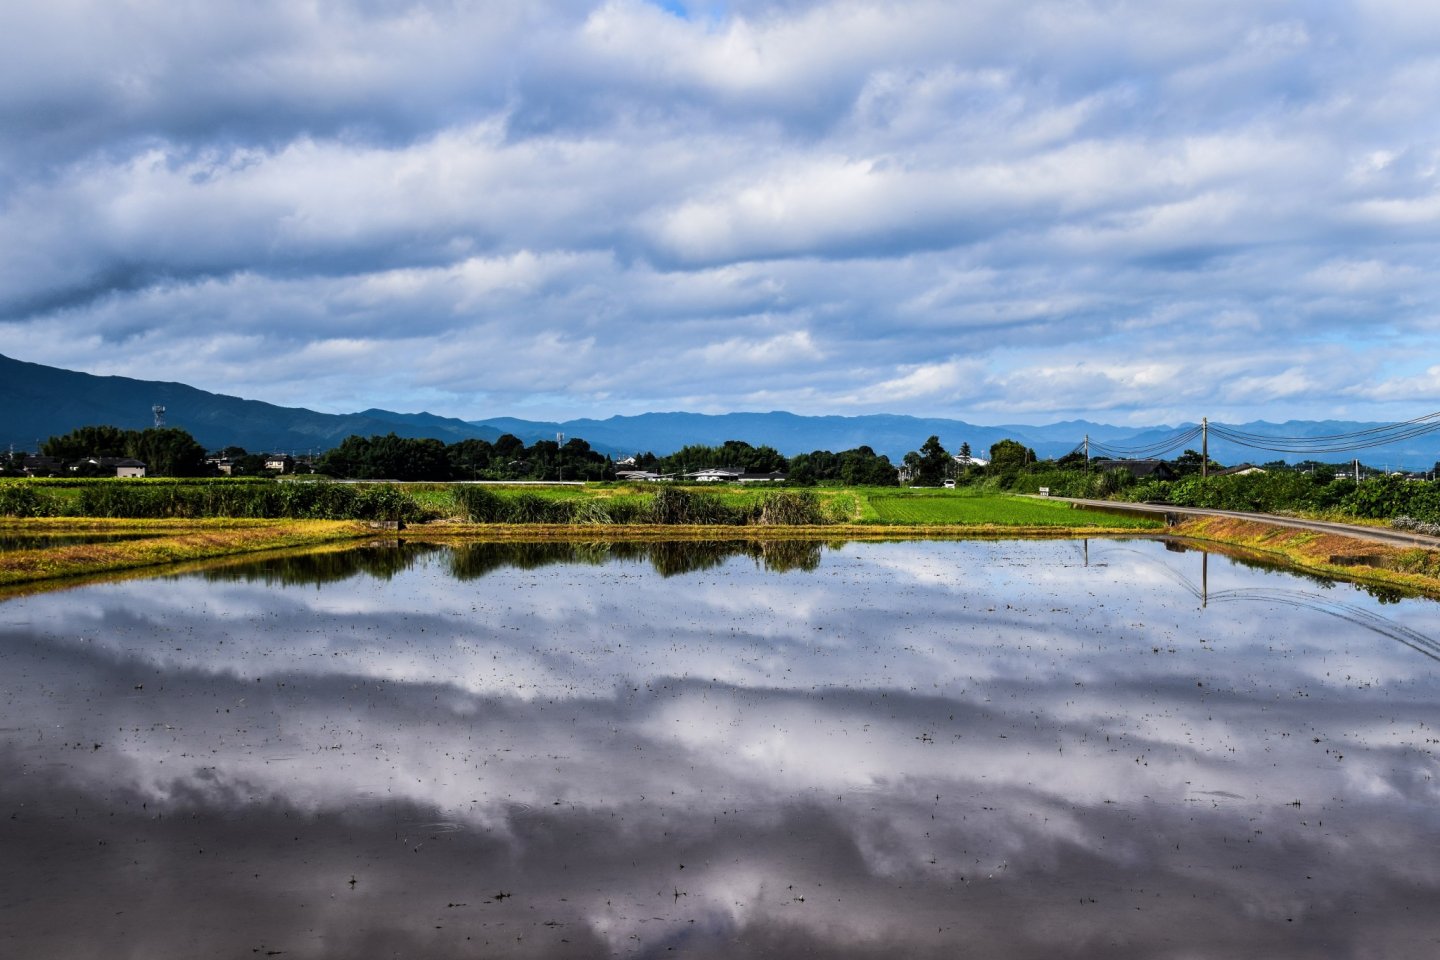 Clouds reflecting in a rice field